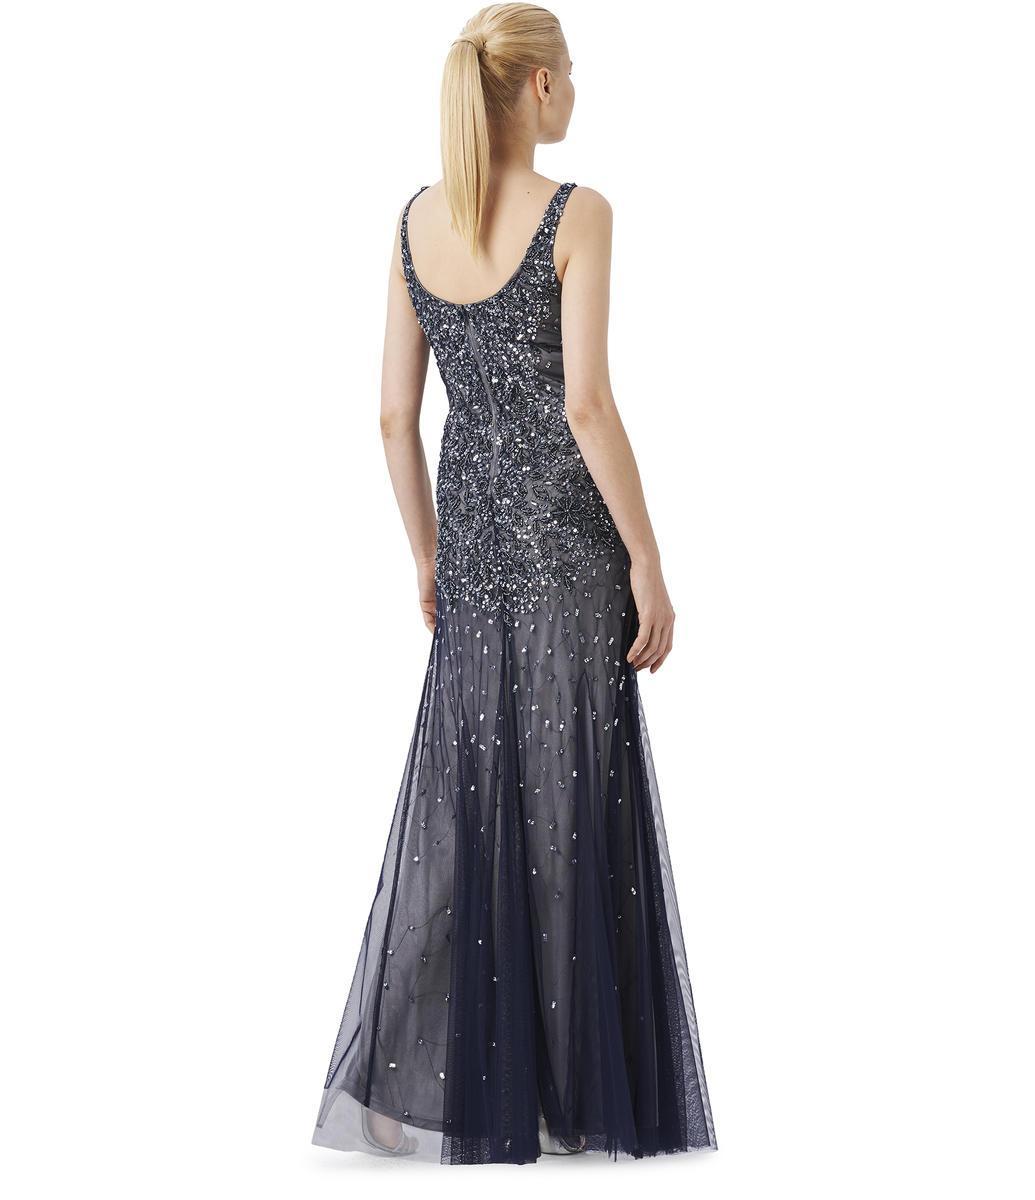 Adrianna Papell - Square Neck Sleeveless Sparkling Gown 91895430 in Blue